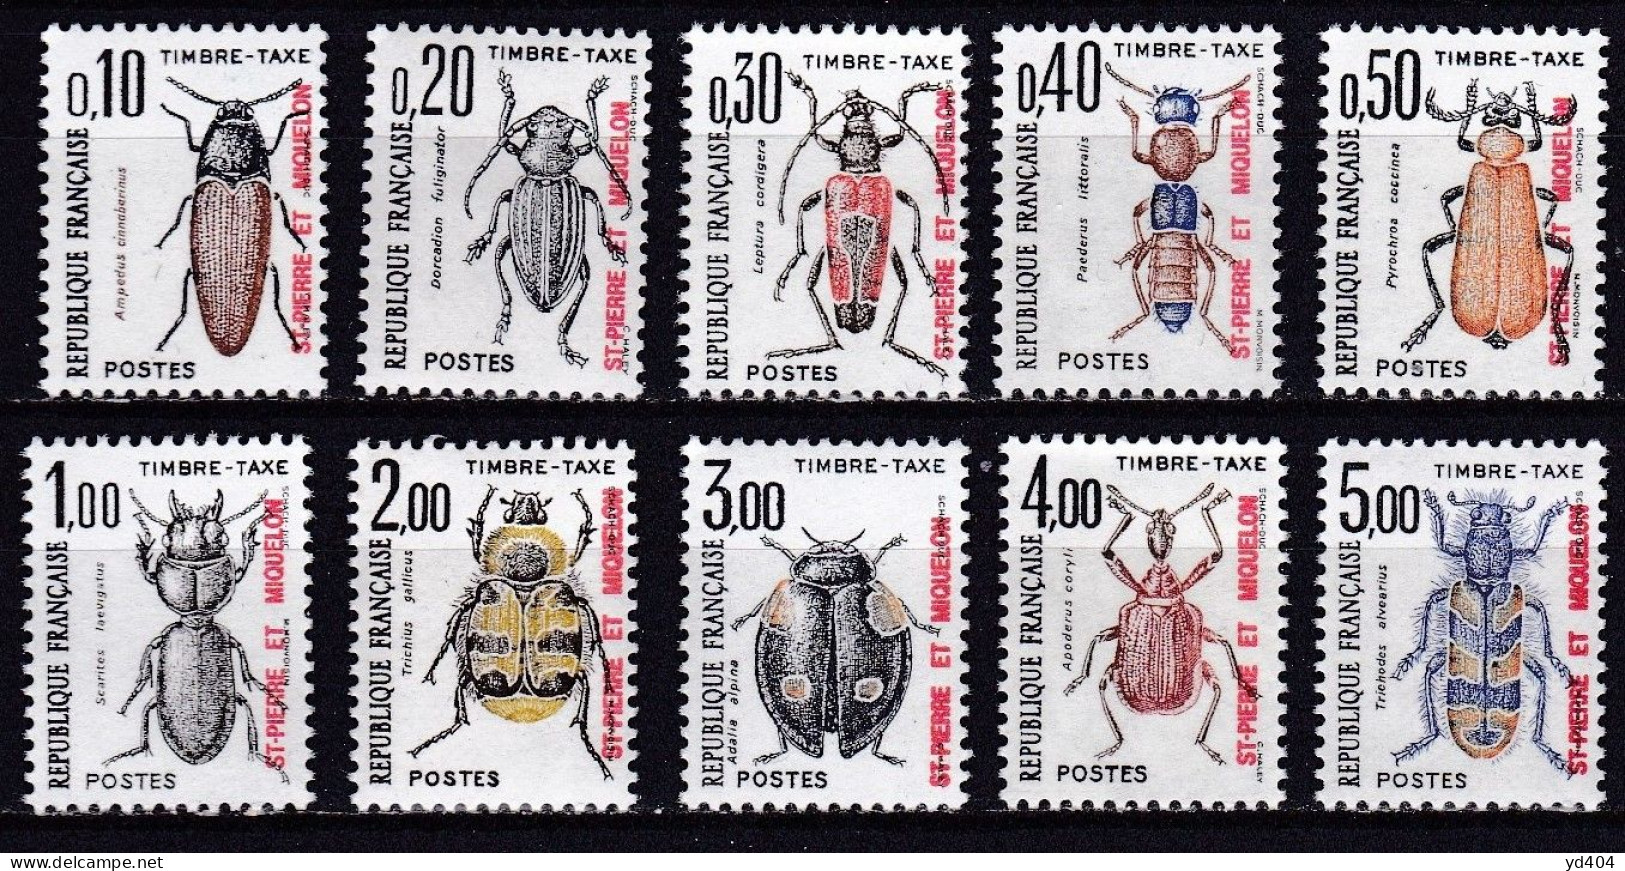 PM-660 – ST PIERRE & MIQUELON – POSTAGE DUE - 1986 – INSECTS – SG # D569/78 MNH 26,50 € - Timbres-taxe